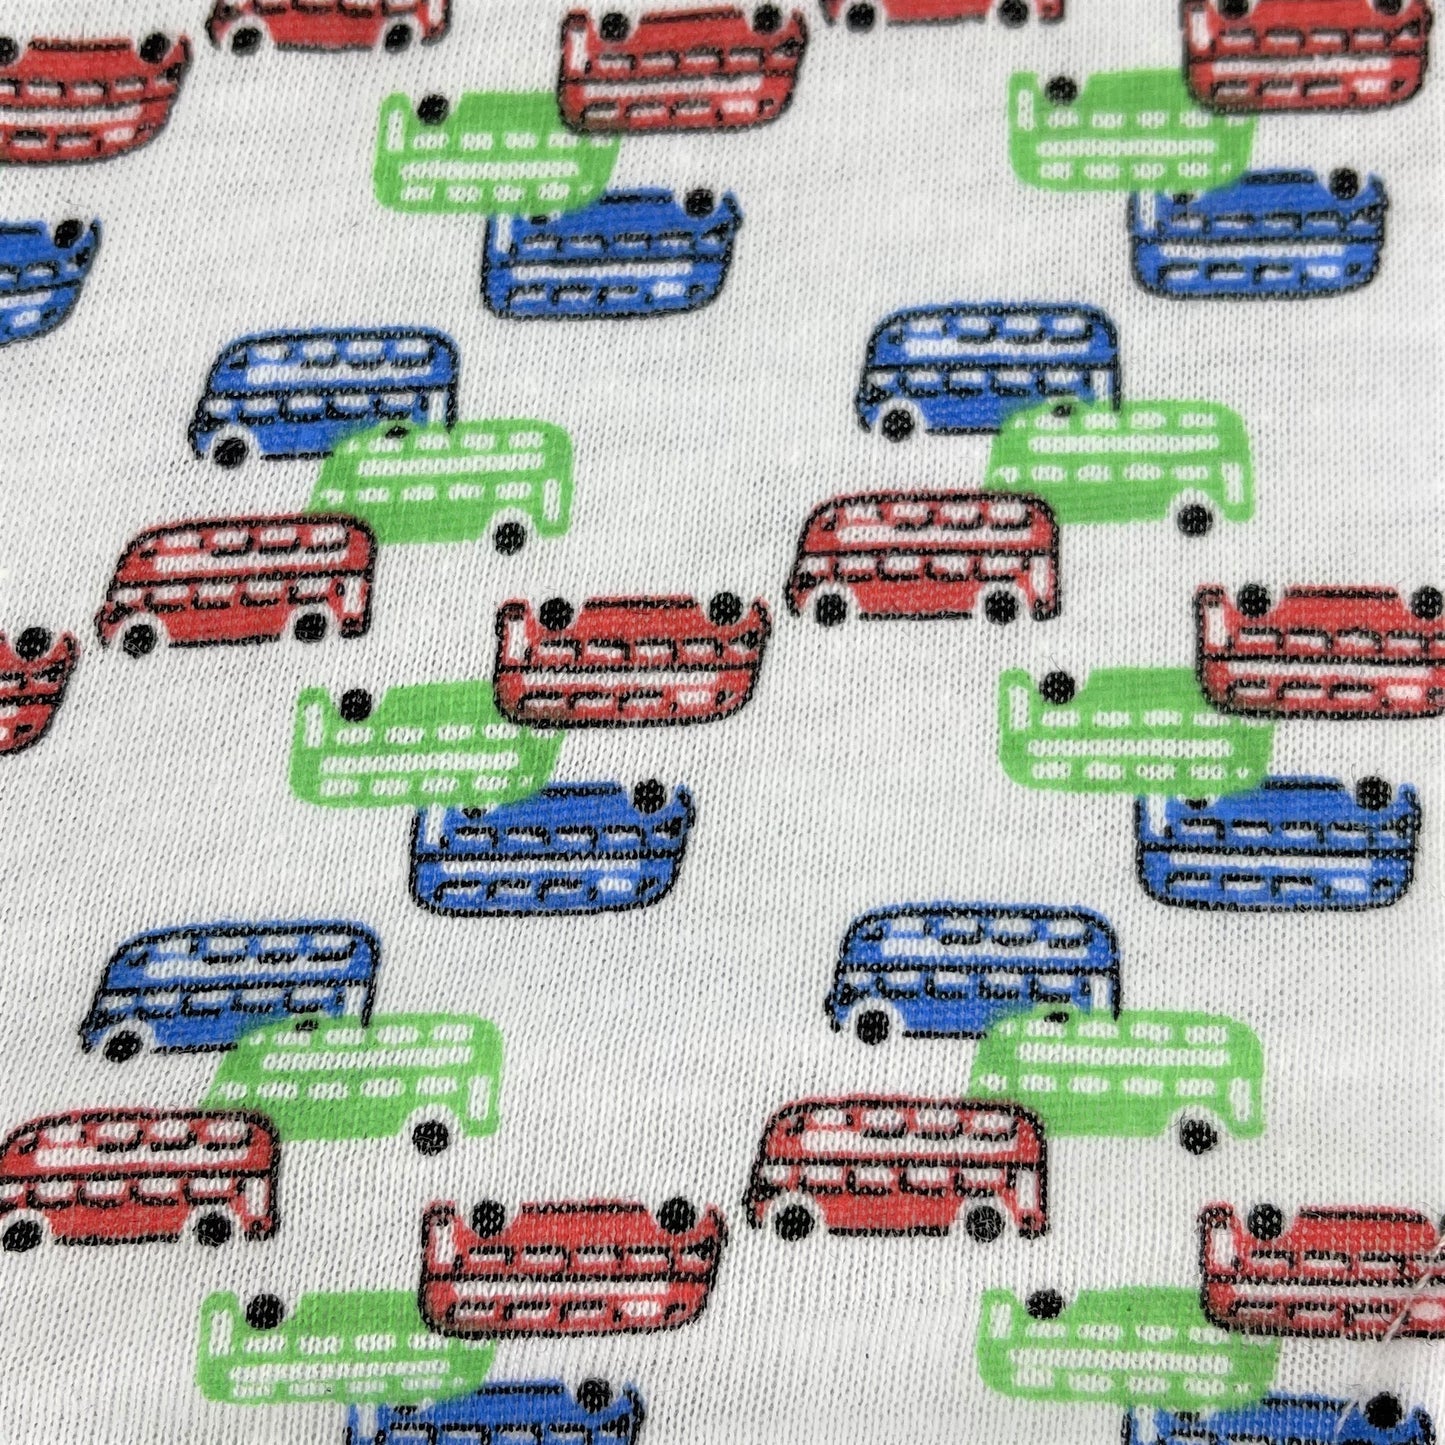 5 Pairs Boys Bus and Car Patterned Underwear Briefs Underpants